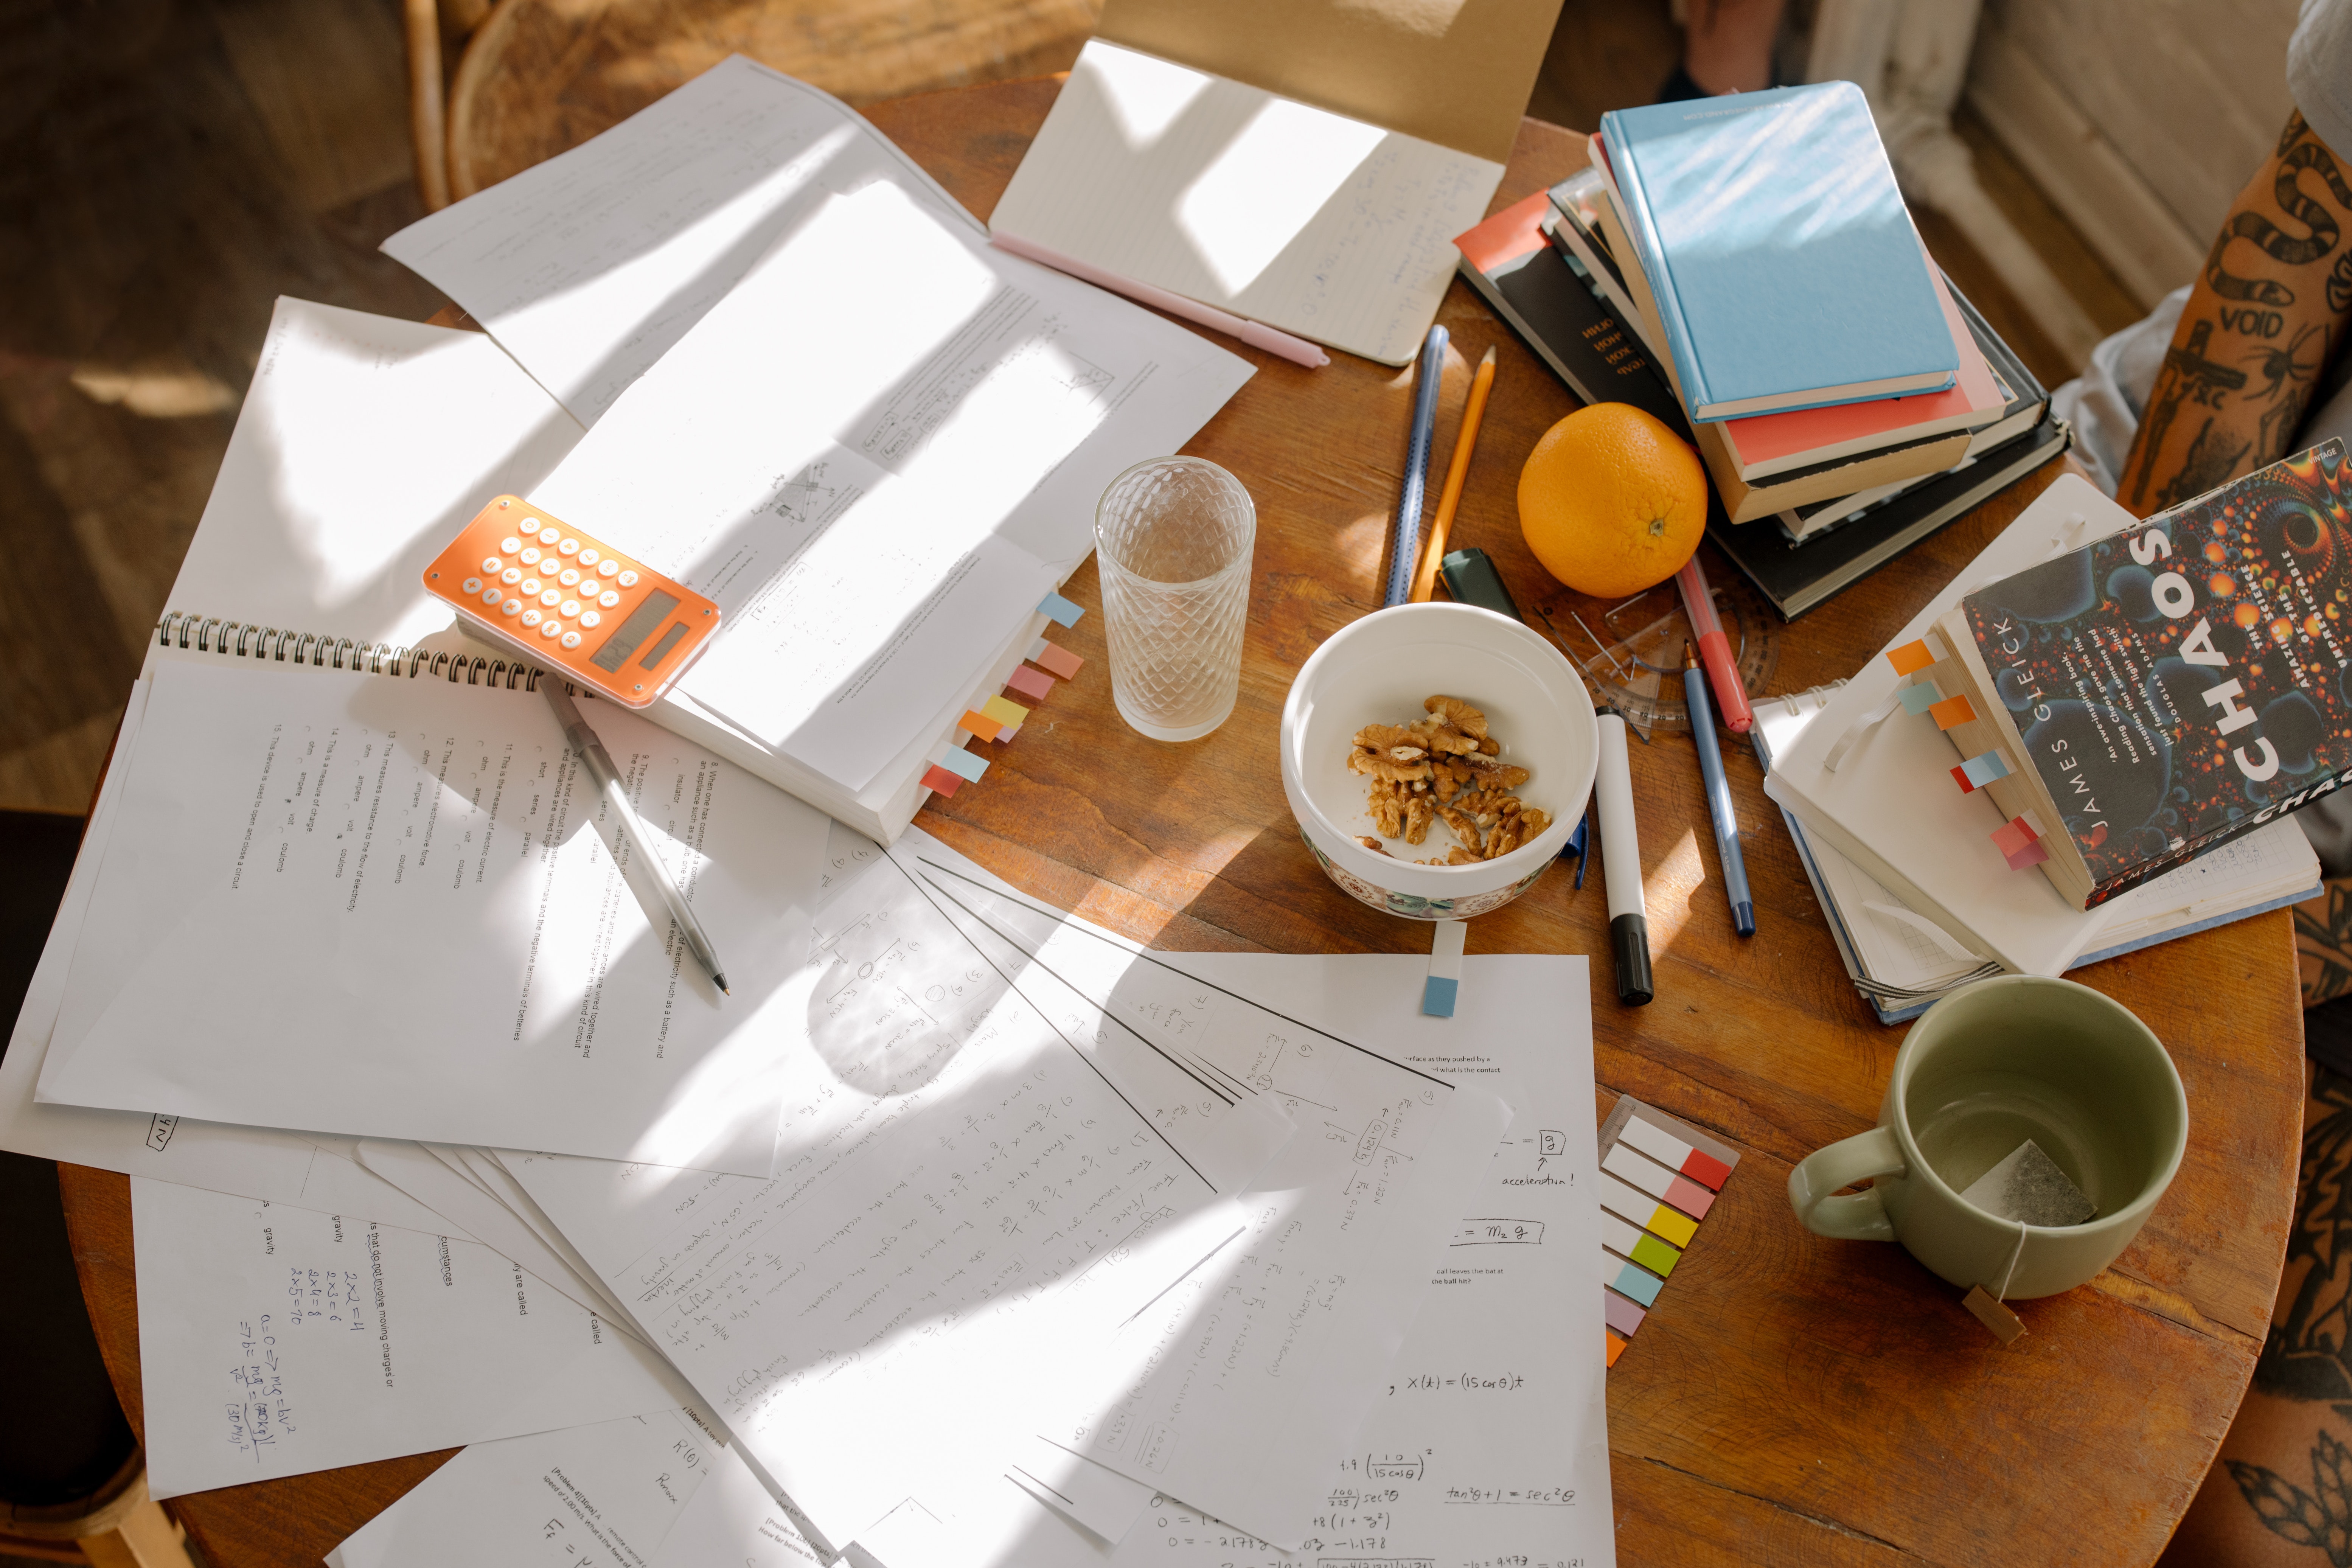 Table full of papers, books, a tea cup and an orange